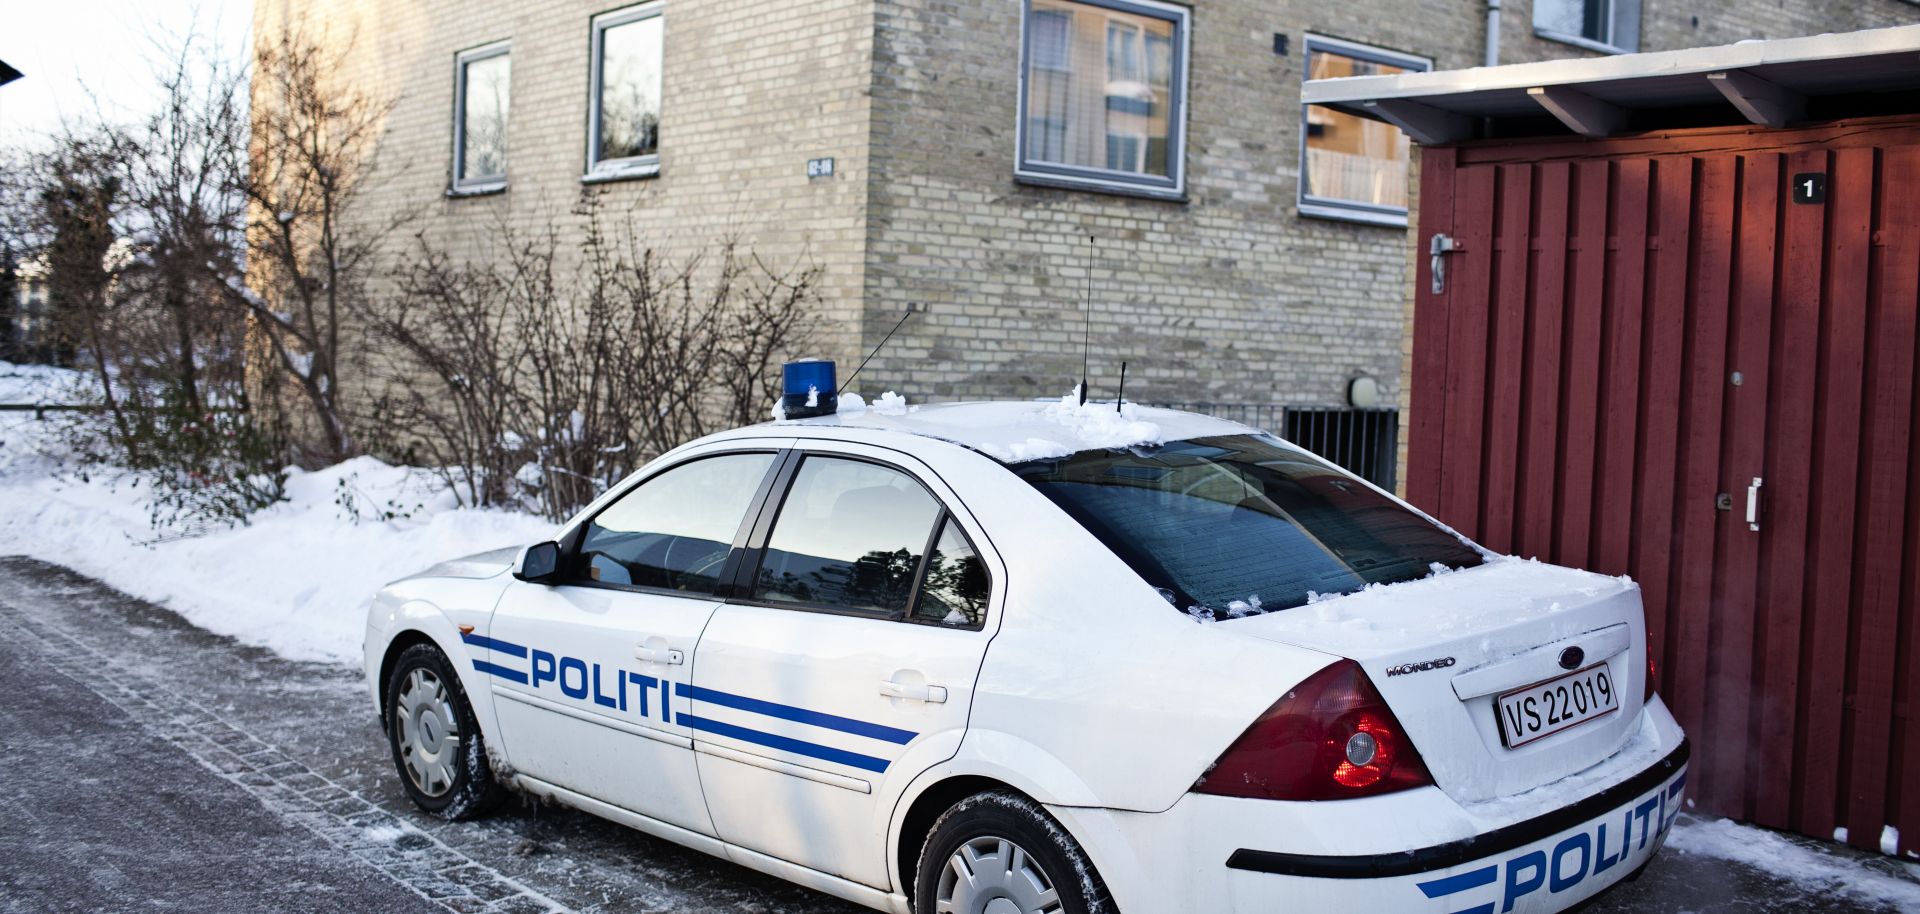 A police car is parked outside of the place where Islamist militants were arrested, suspected of a plot to massacre staff at a Danish newspaper.